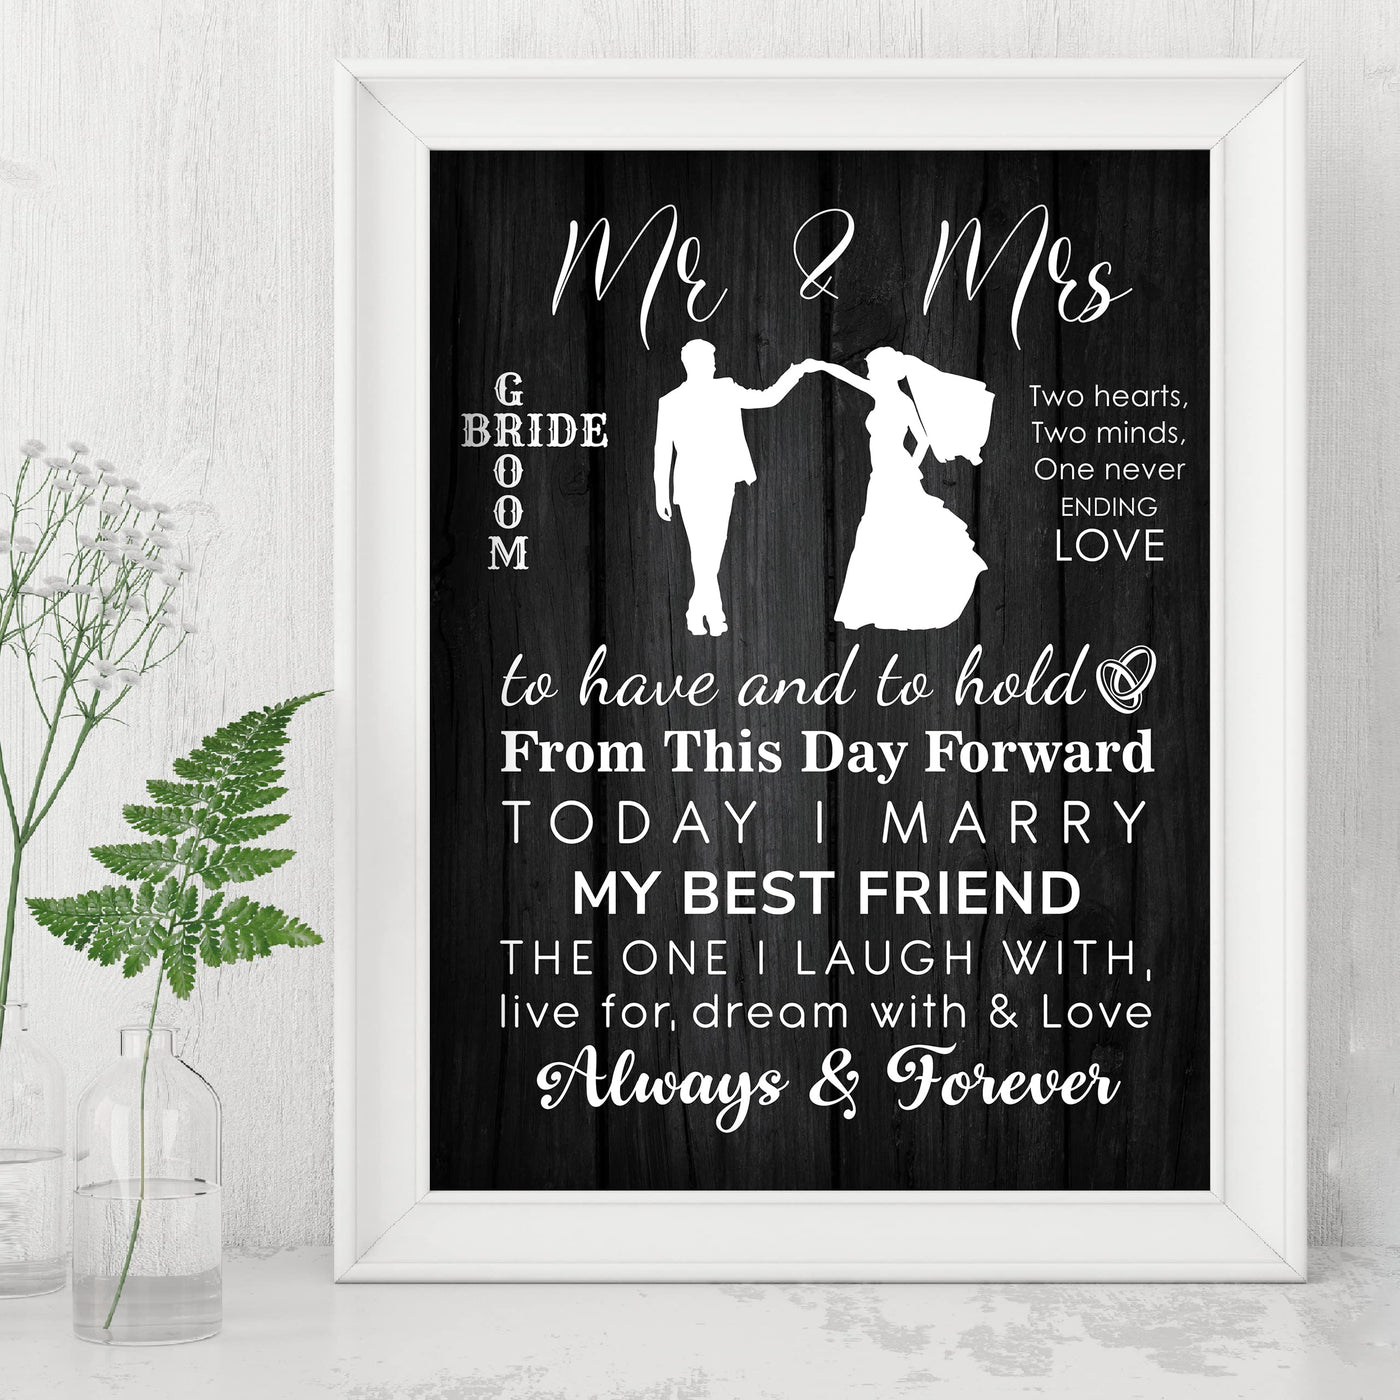 "Mr & Mrs - Always & Forever" Wedding Quotes Wall Art Decor -11 x 14" Inspirational Love & Marriage Print-Ready to Frame. Romantic Wedding & Anniversary Gift for Husband, Wife & Newlyweds